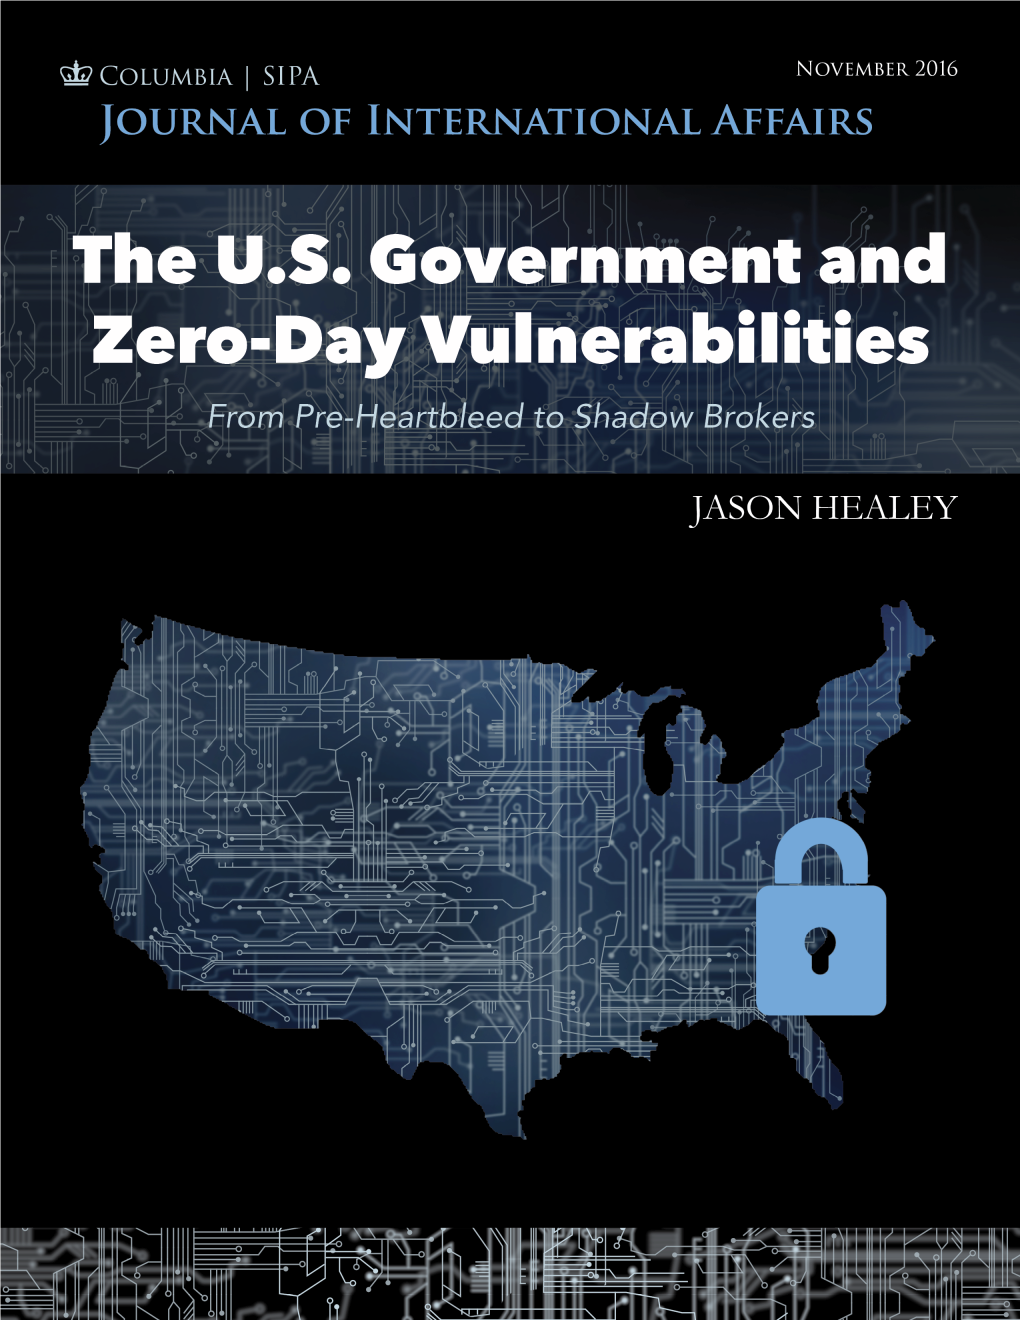 The U.S. Government and Zero-Day Vulnerabilities Intelligence Purposes Did Not Put U.S